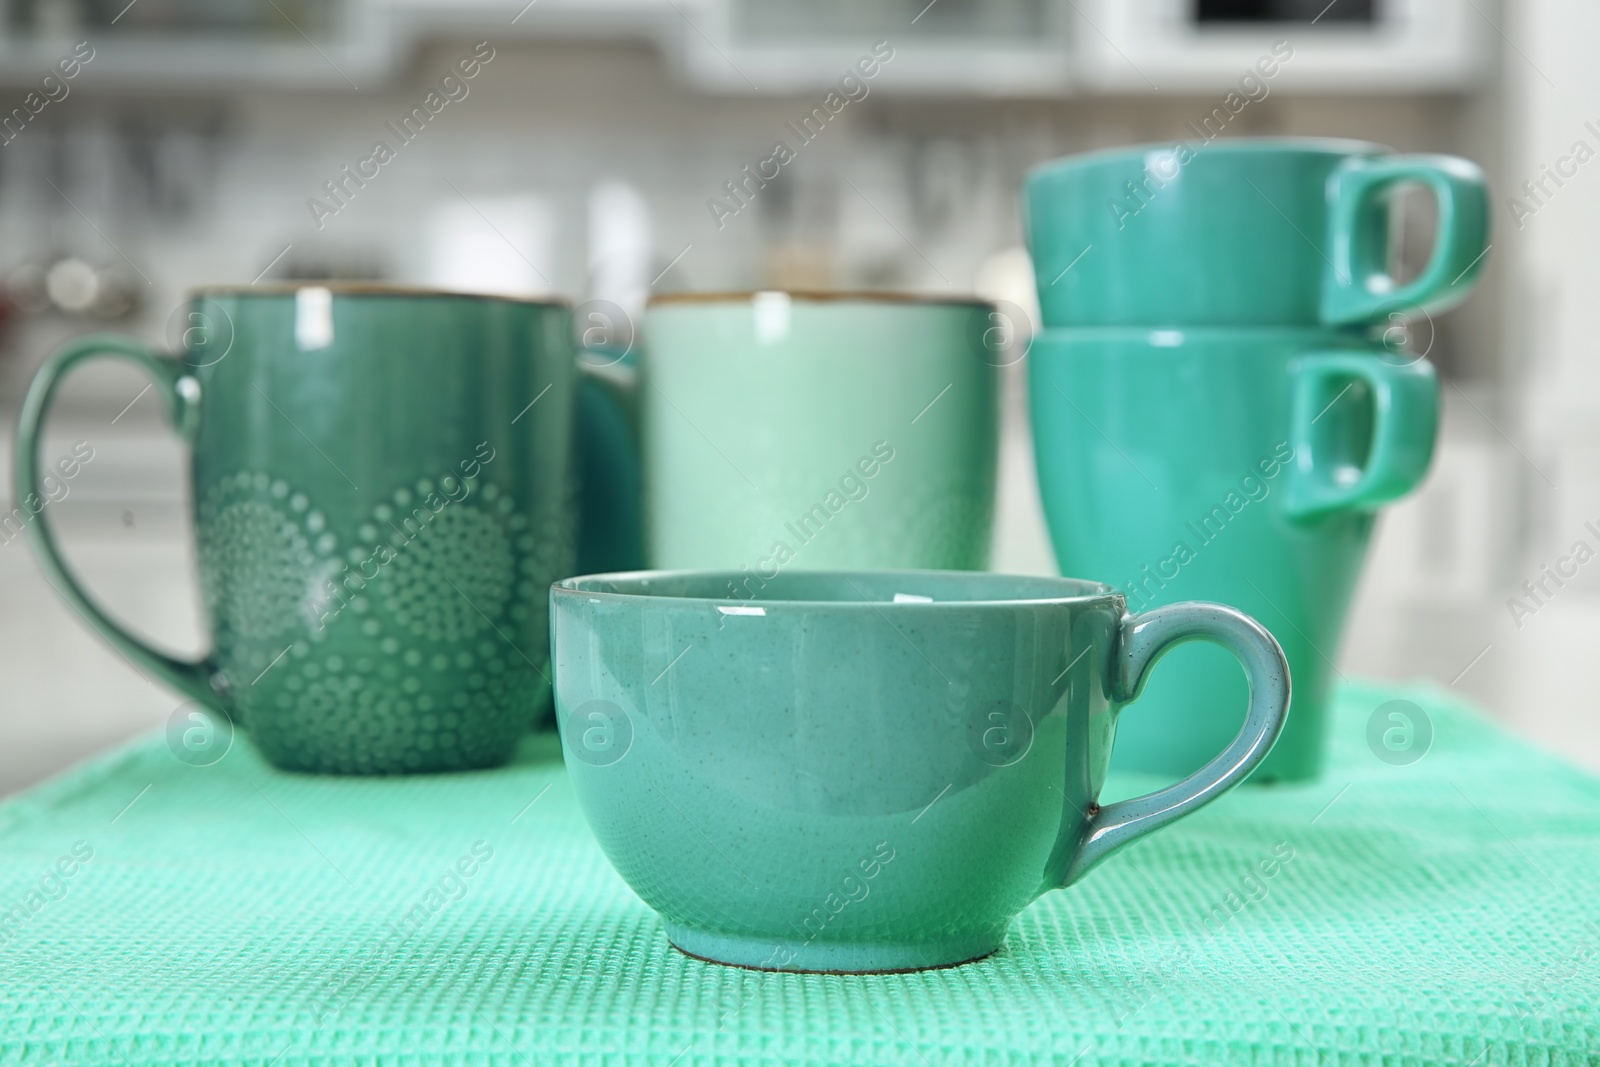 Photo of Ceramic cups in different mint color shades on table